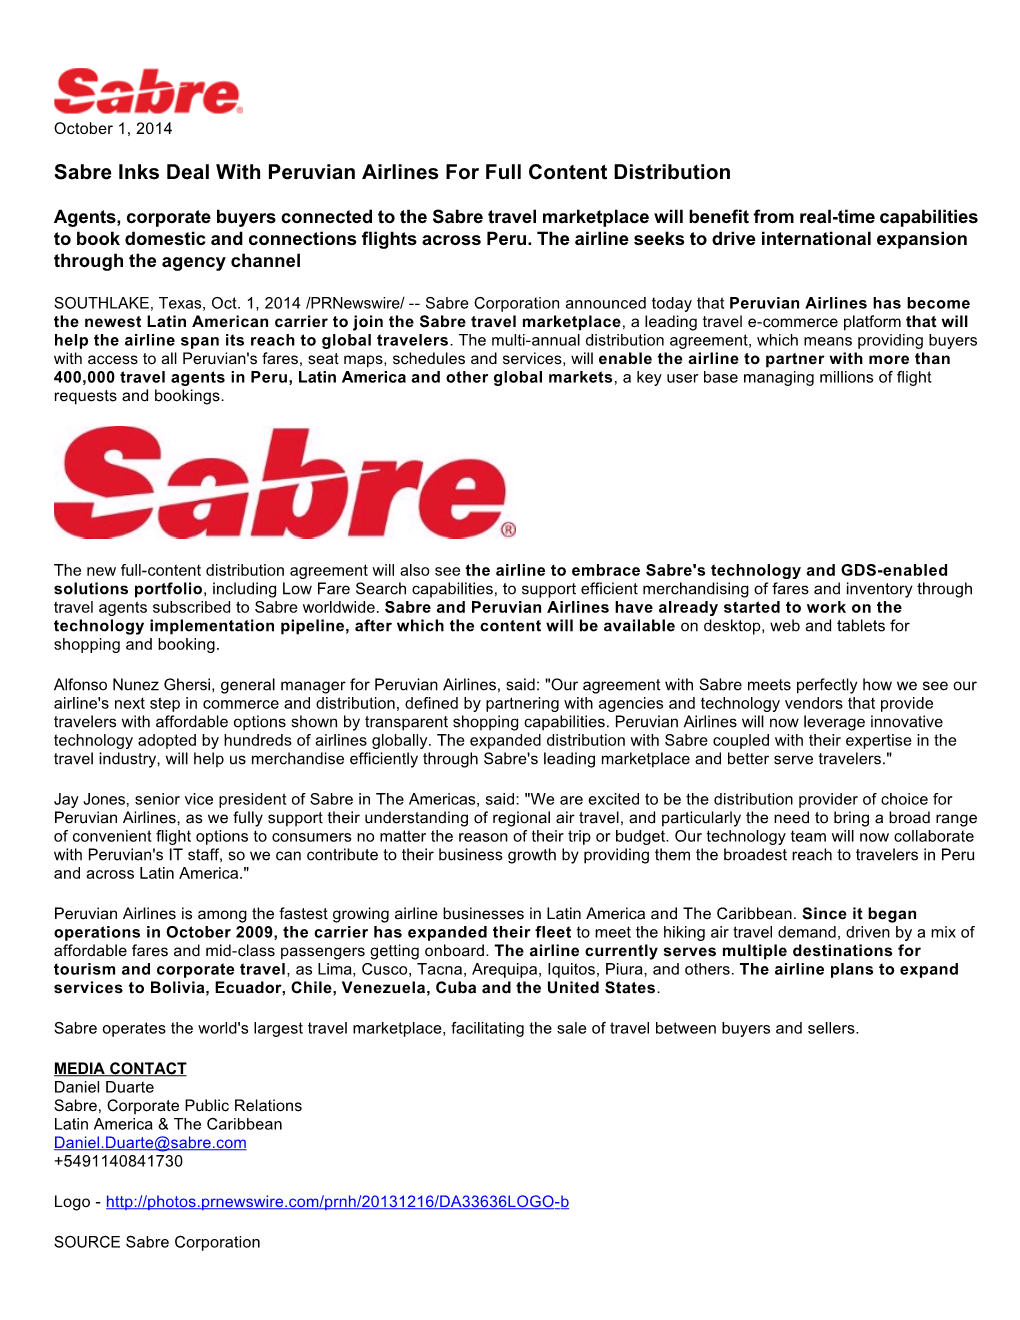 Sabre Inks Deal with Peruvian Airlines for Full Content Distribution